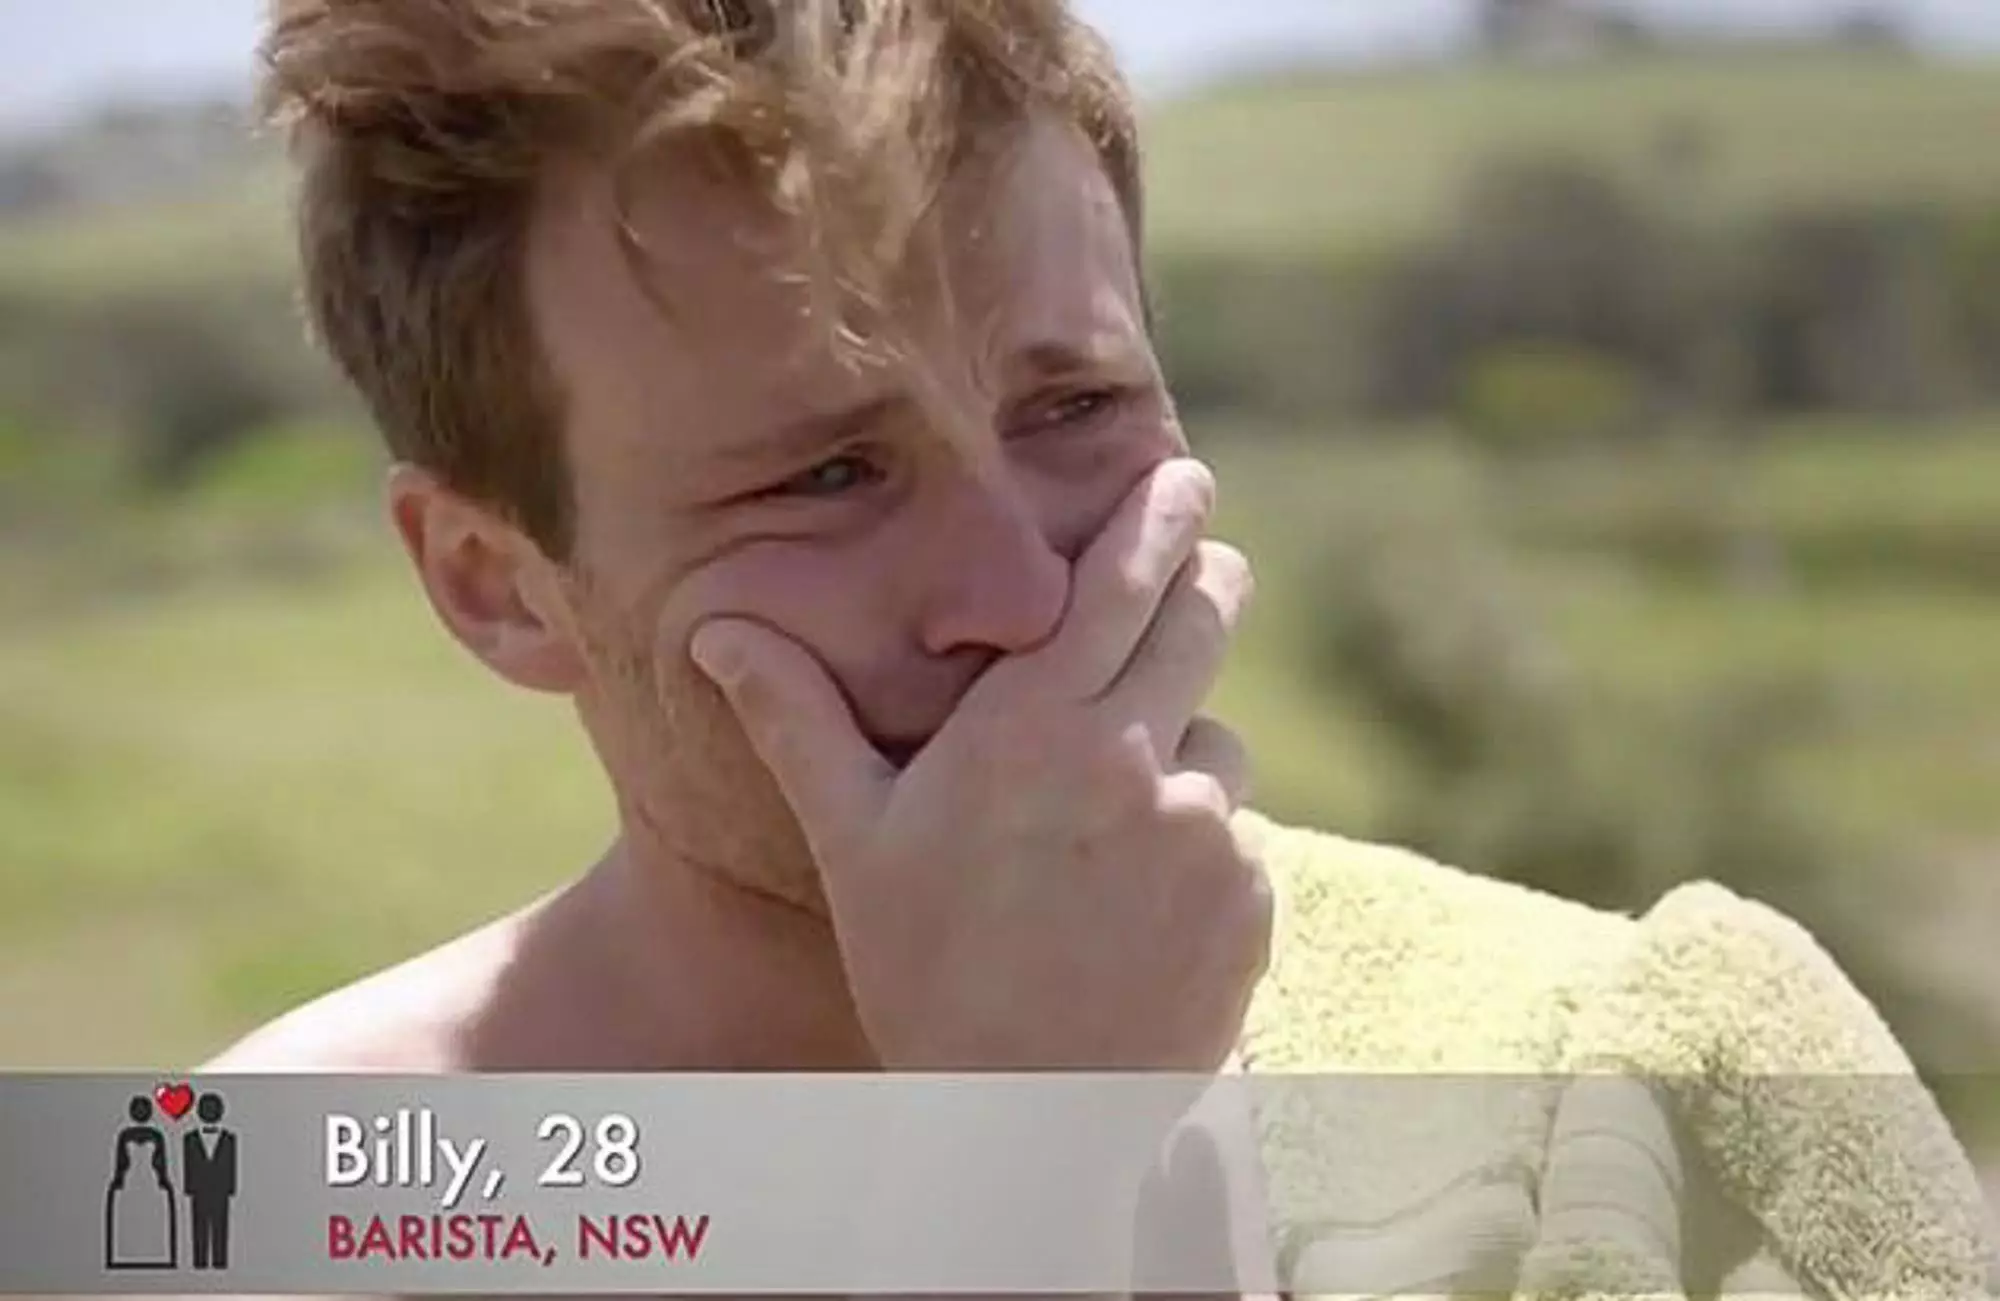 Billy was left emotional after Susie's treatment on the show (